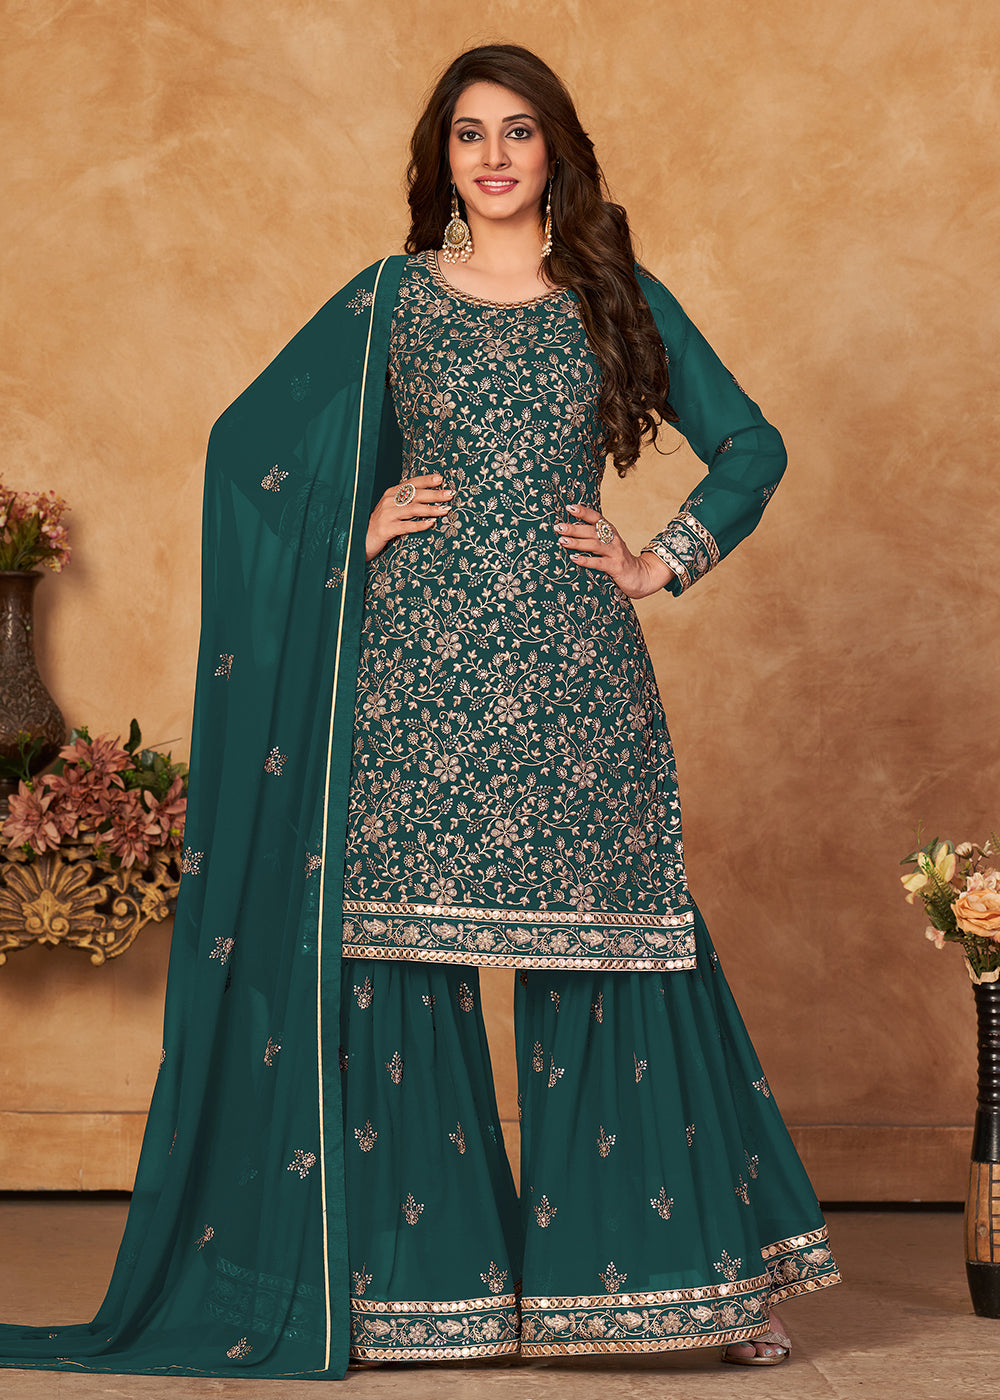 Shop Now Fantastic Rama Green Embroidered Ceremonial Gharara Suit Online at Empress Clothing in USA, UK, Canada, Germany & Worldwide. 